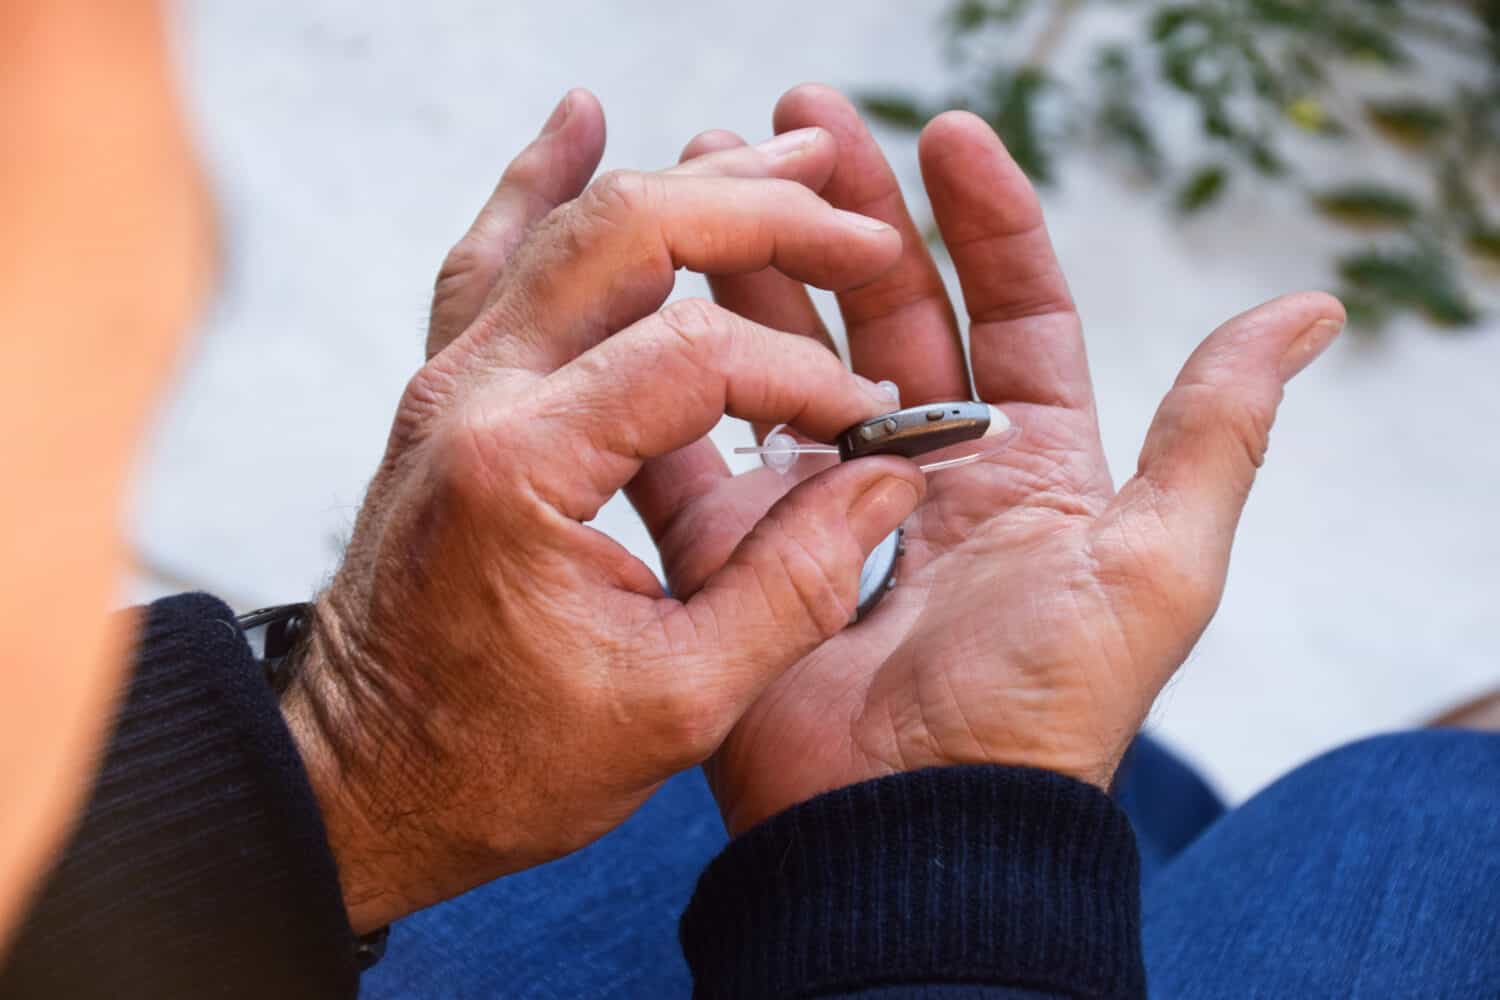 Two male hands hold two small, gray Lexie Lumen quality hearing aids after taking a fast online hearing test